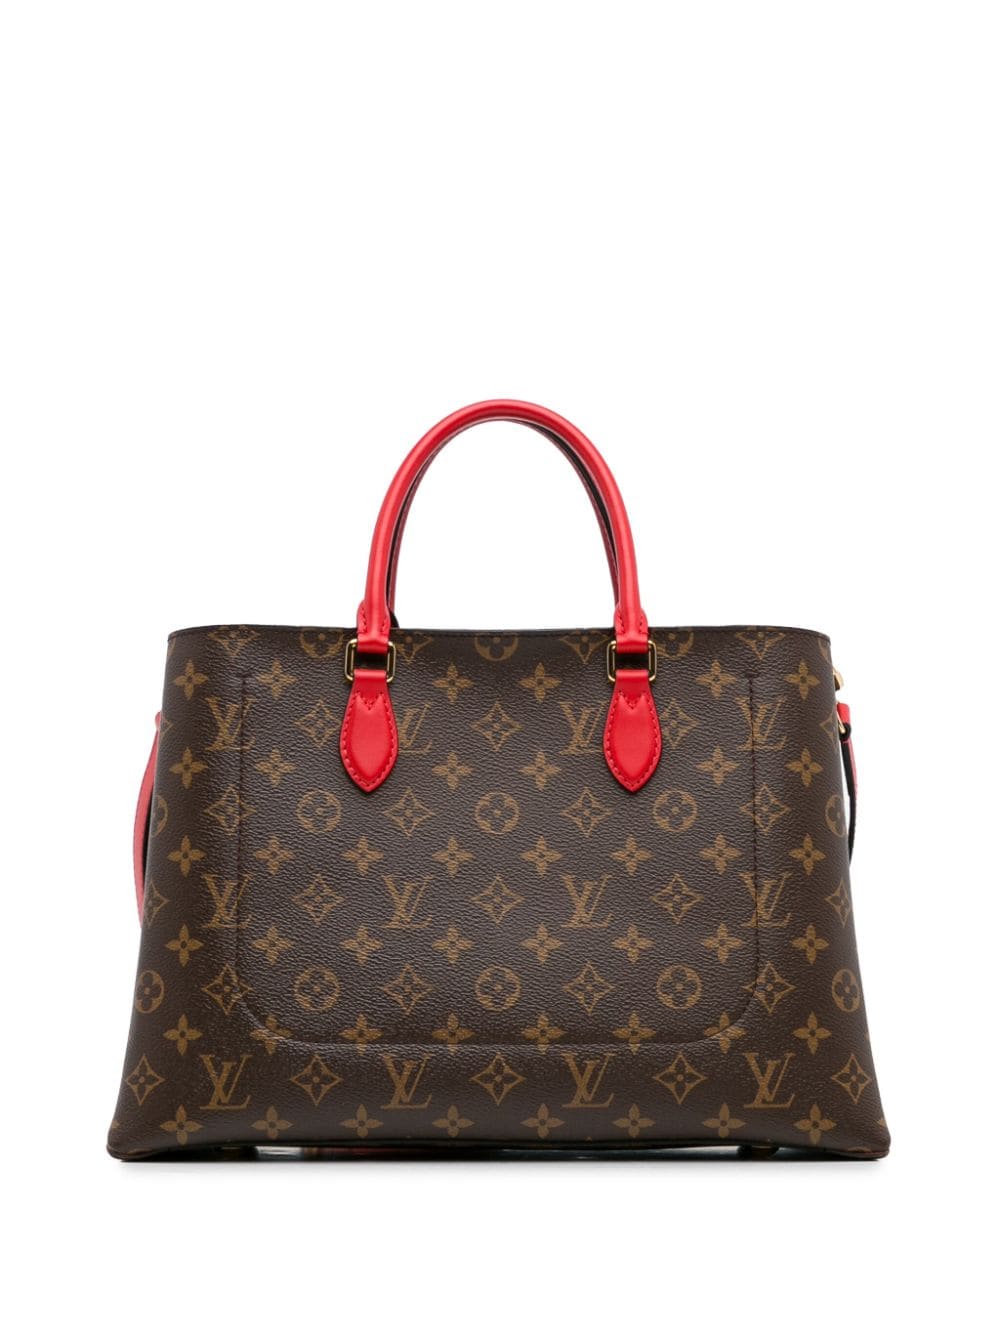 Pre-owned Louis Vuitton Monogram Flower Tote 斜挎包（2019年典藏款） In Brown